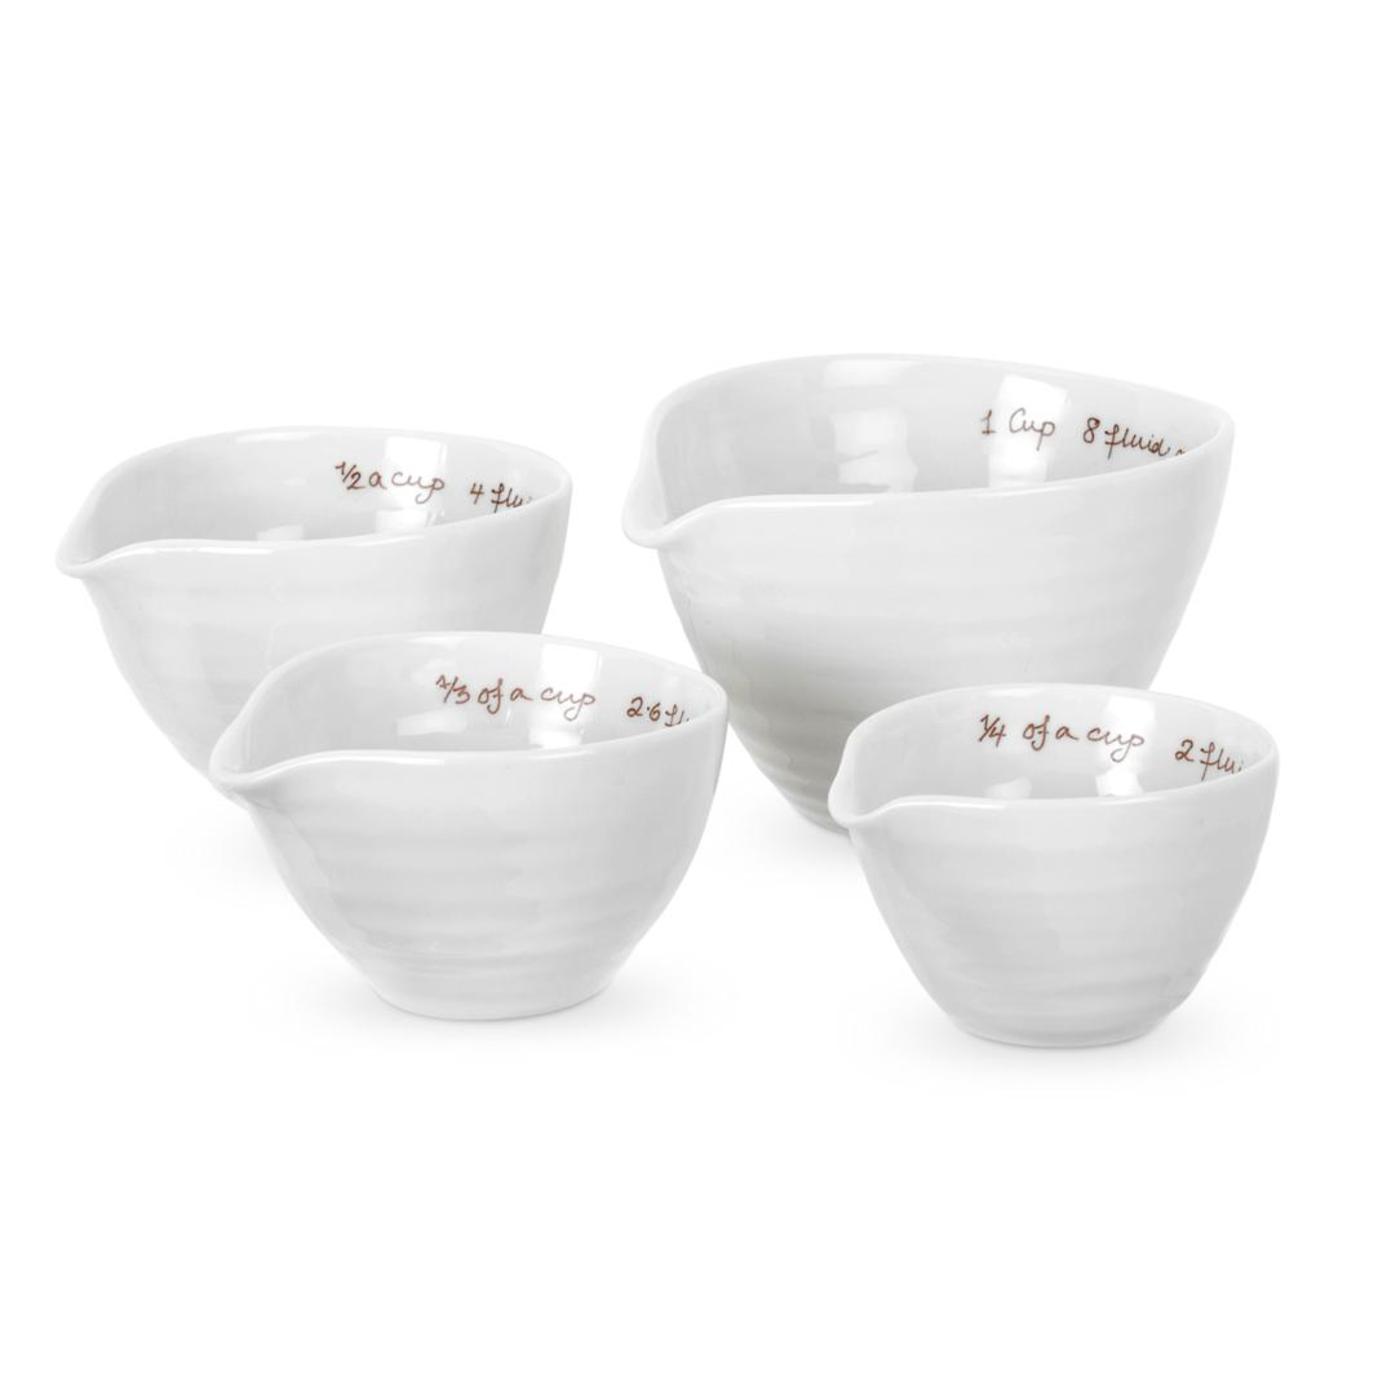 Sophie Conran for White Measuring Cups image number null